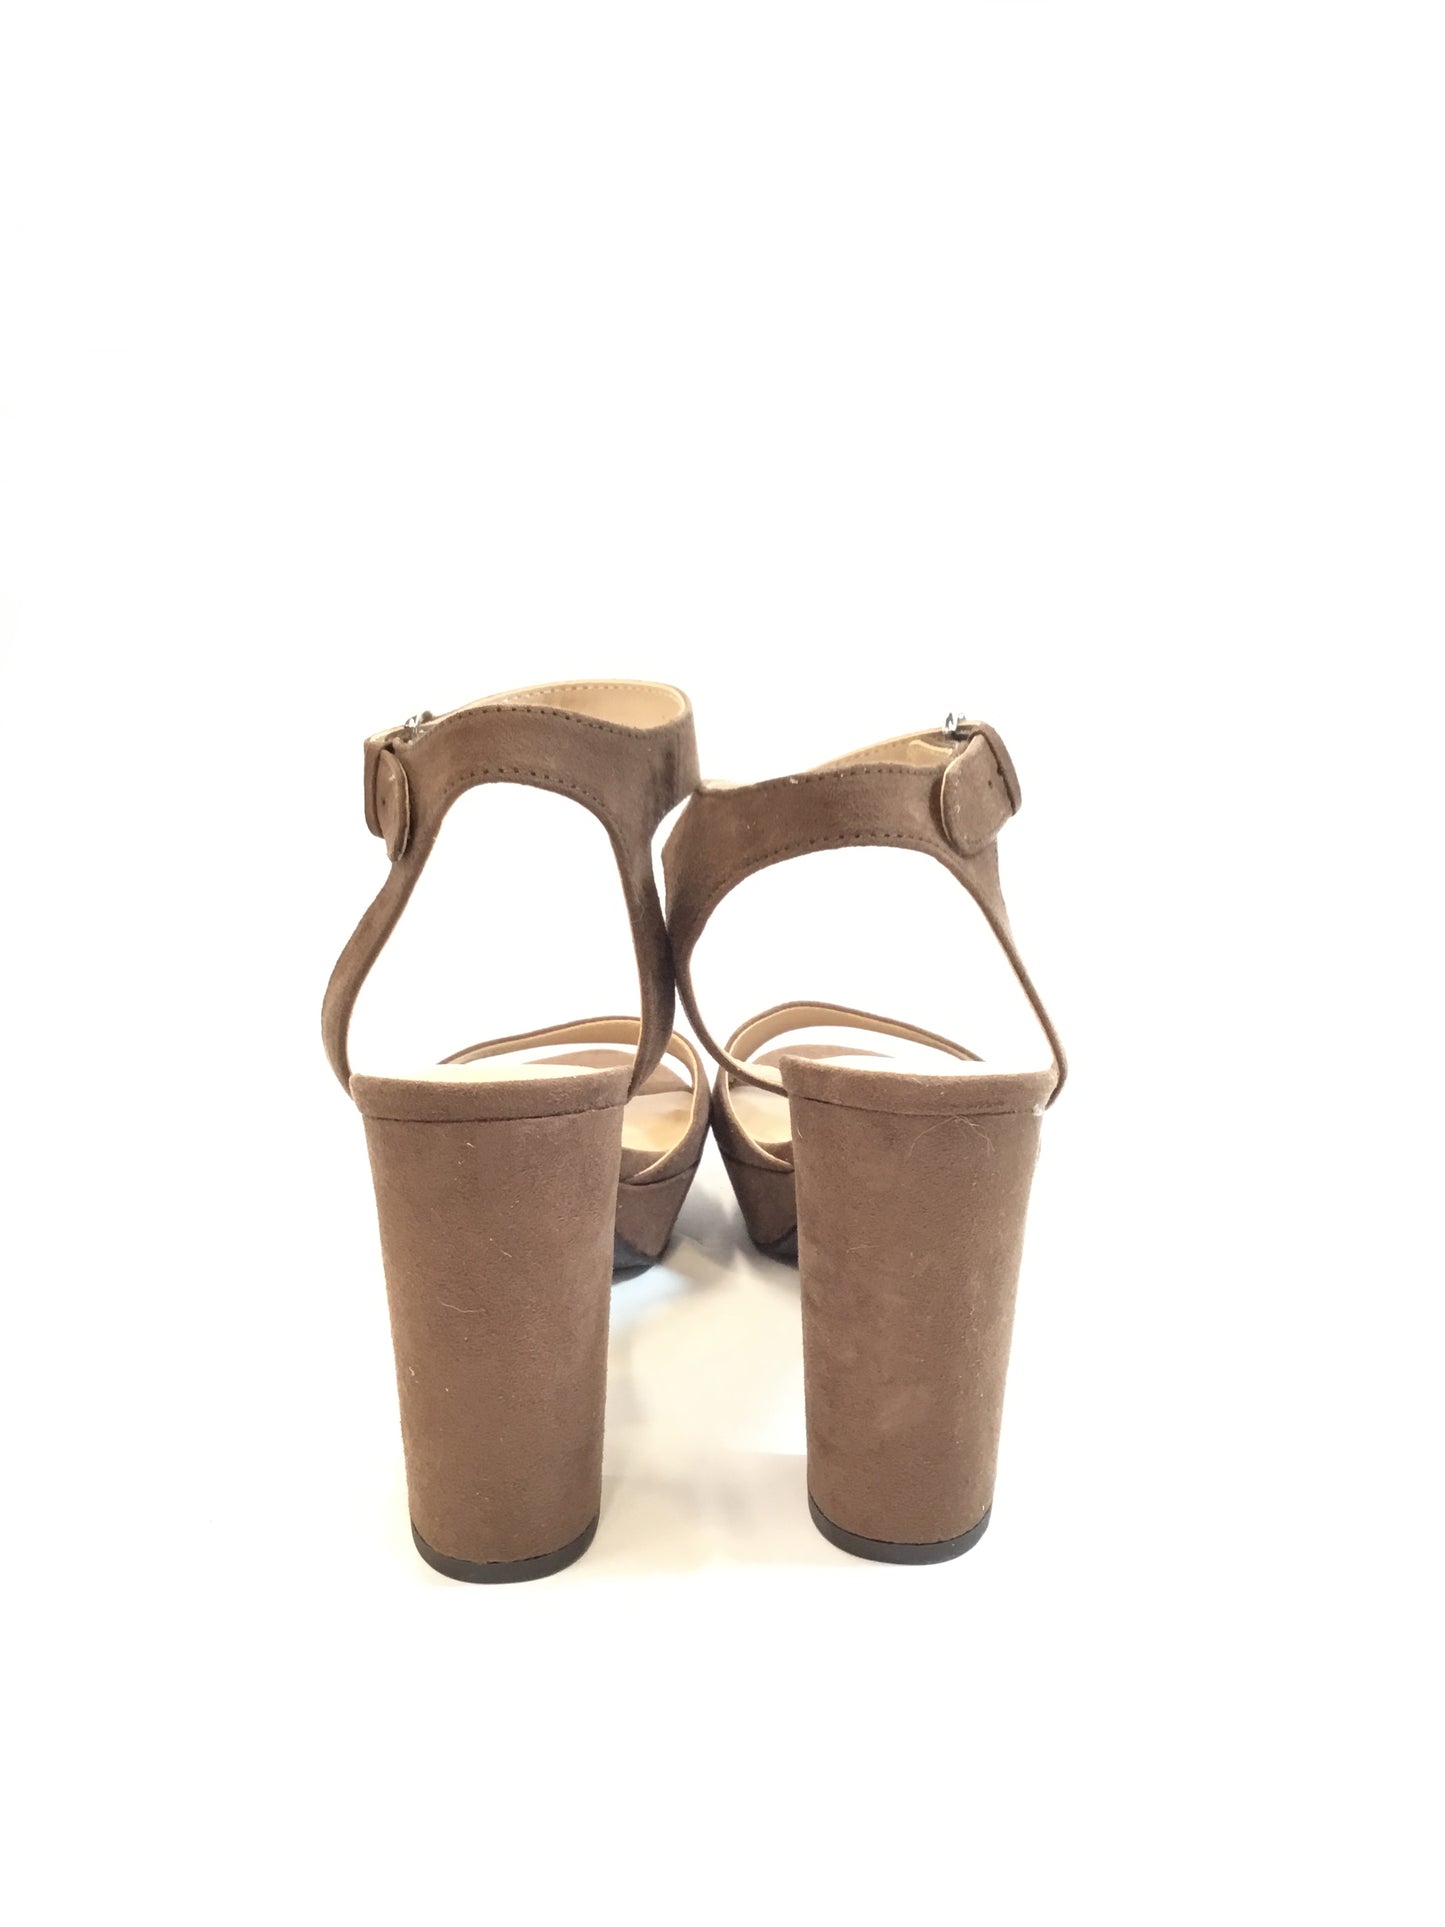 Shoes Heels Block By Unisa  Size: 8.5